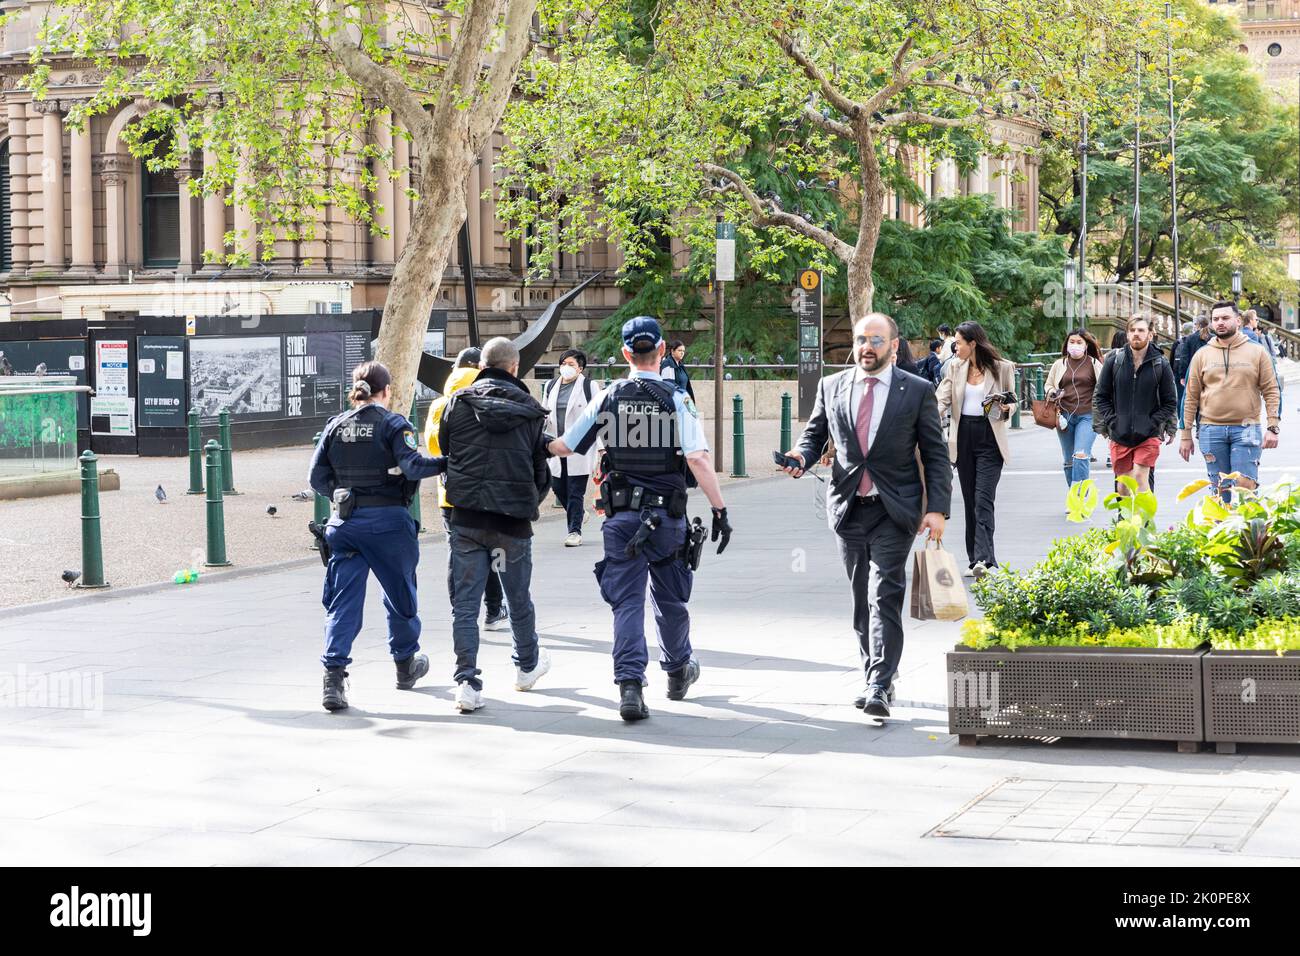 Australian NSW Police in Sydney escort an arrest male along George street in Sydney, male and female police officer armed and in uniform,Sydney Stock Photo